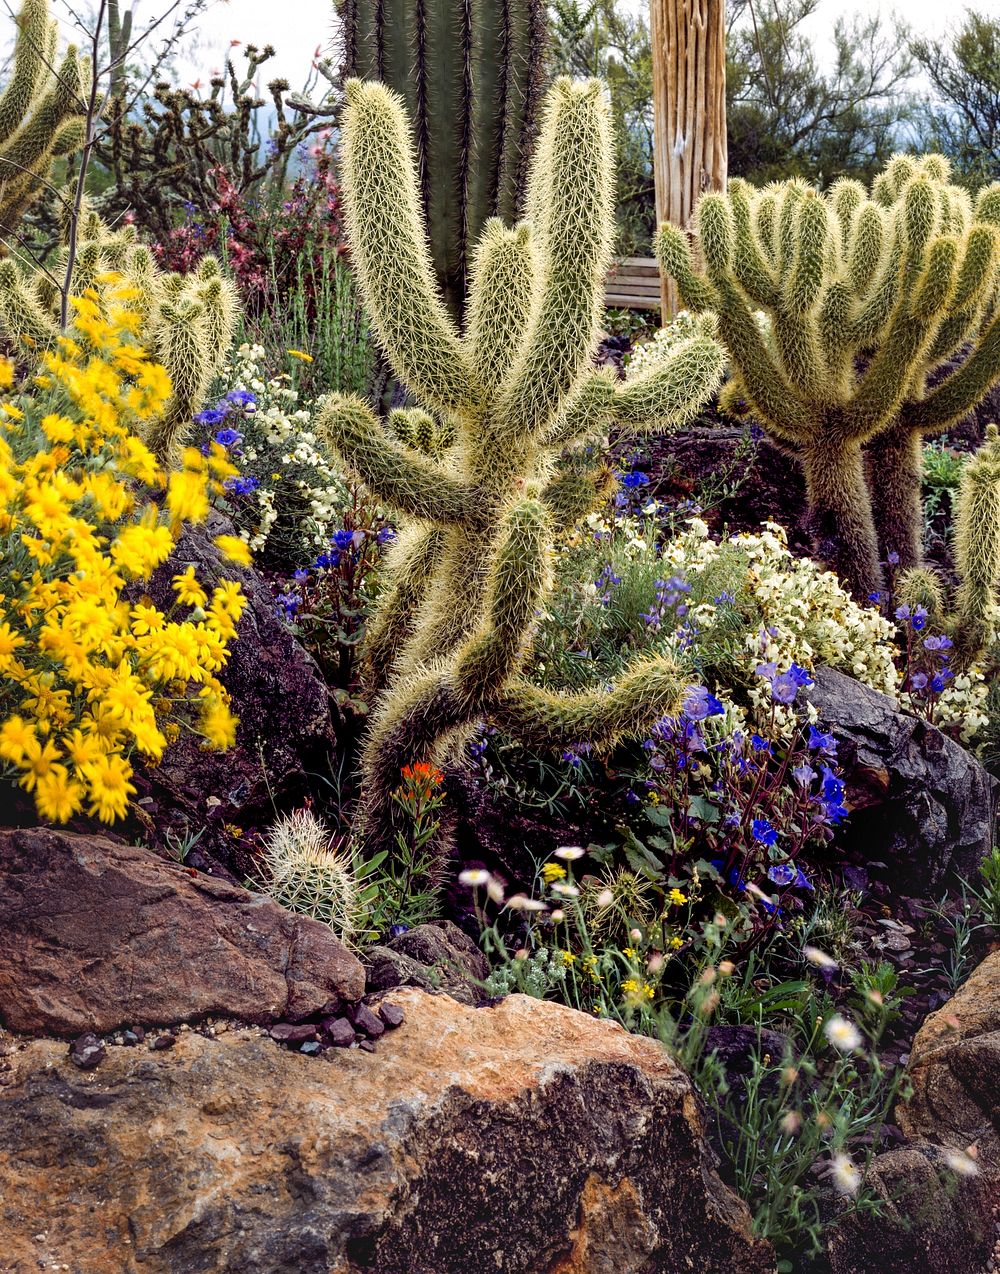 Cacti and flowers near Tucson. Original image from Carol M. Highsmith&rsquo;s America, Library of Congress collection.…